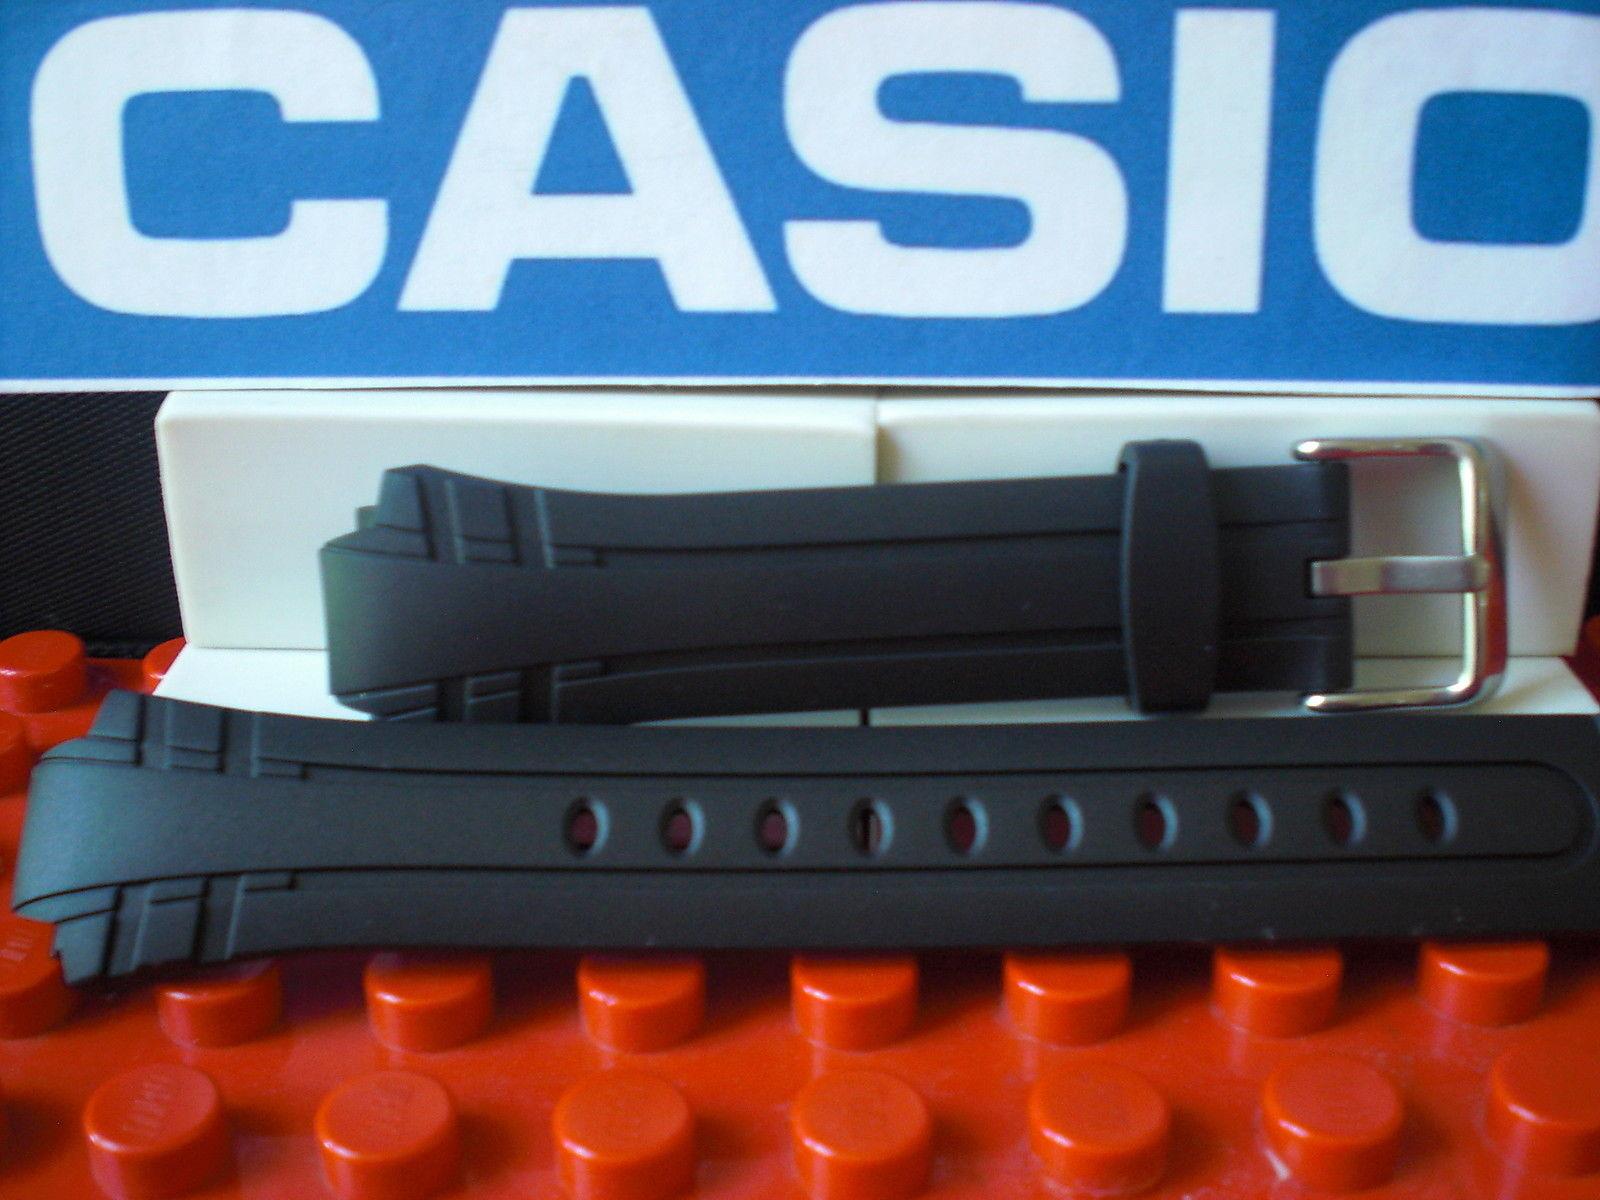 Casio watchband MTR-302 Black Resin  w/ Steel buckle and Attaching Pins